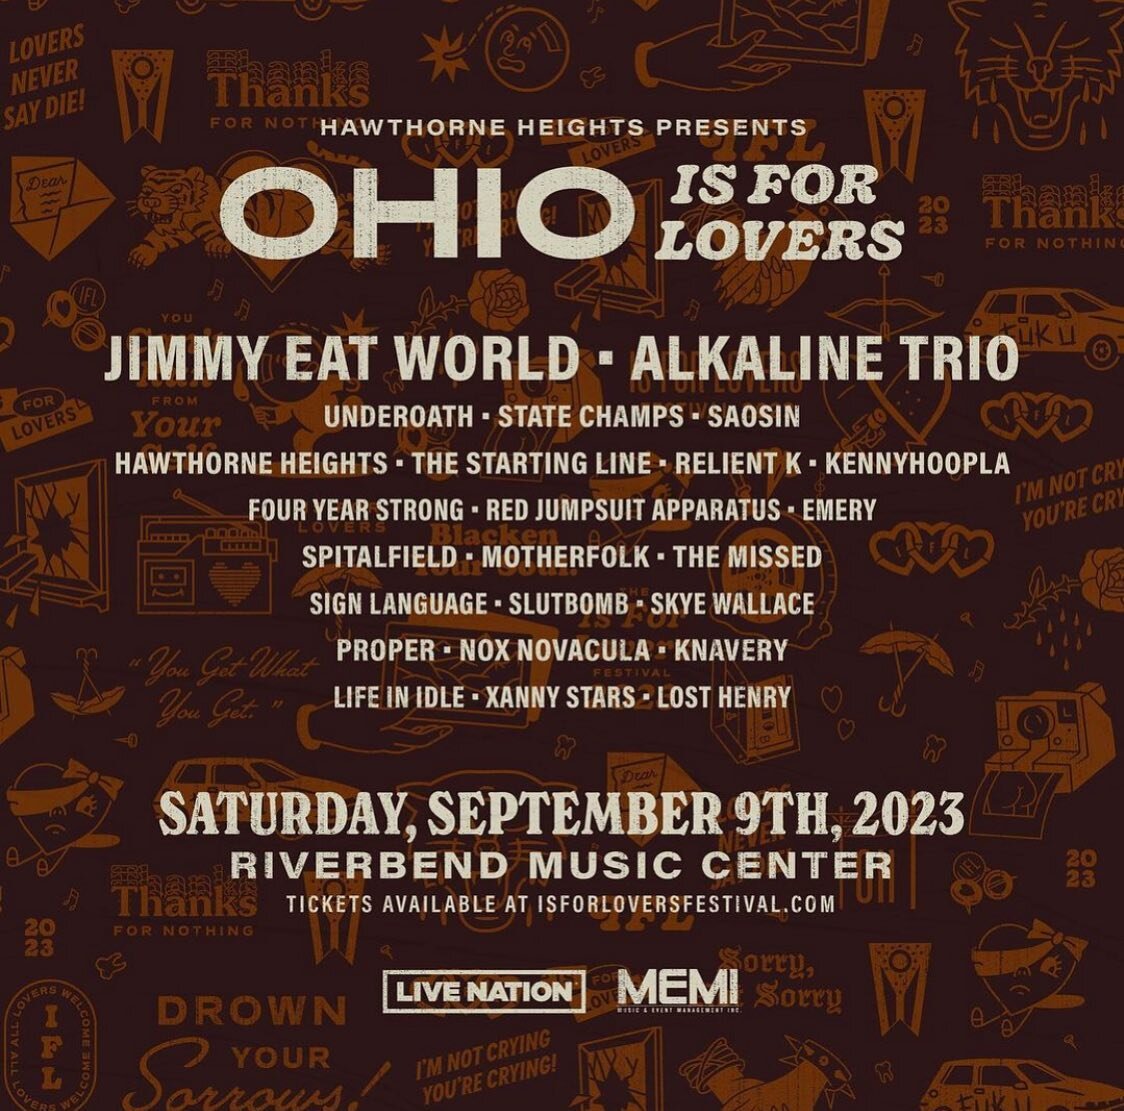 Motherfolk will be at Ohio @isforloversfestival this year!